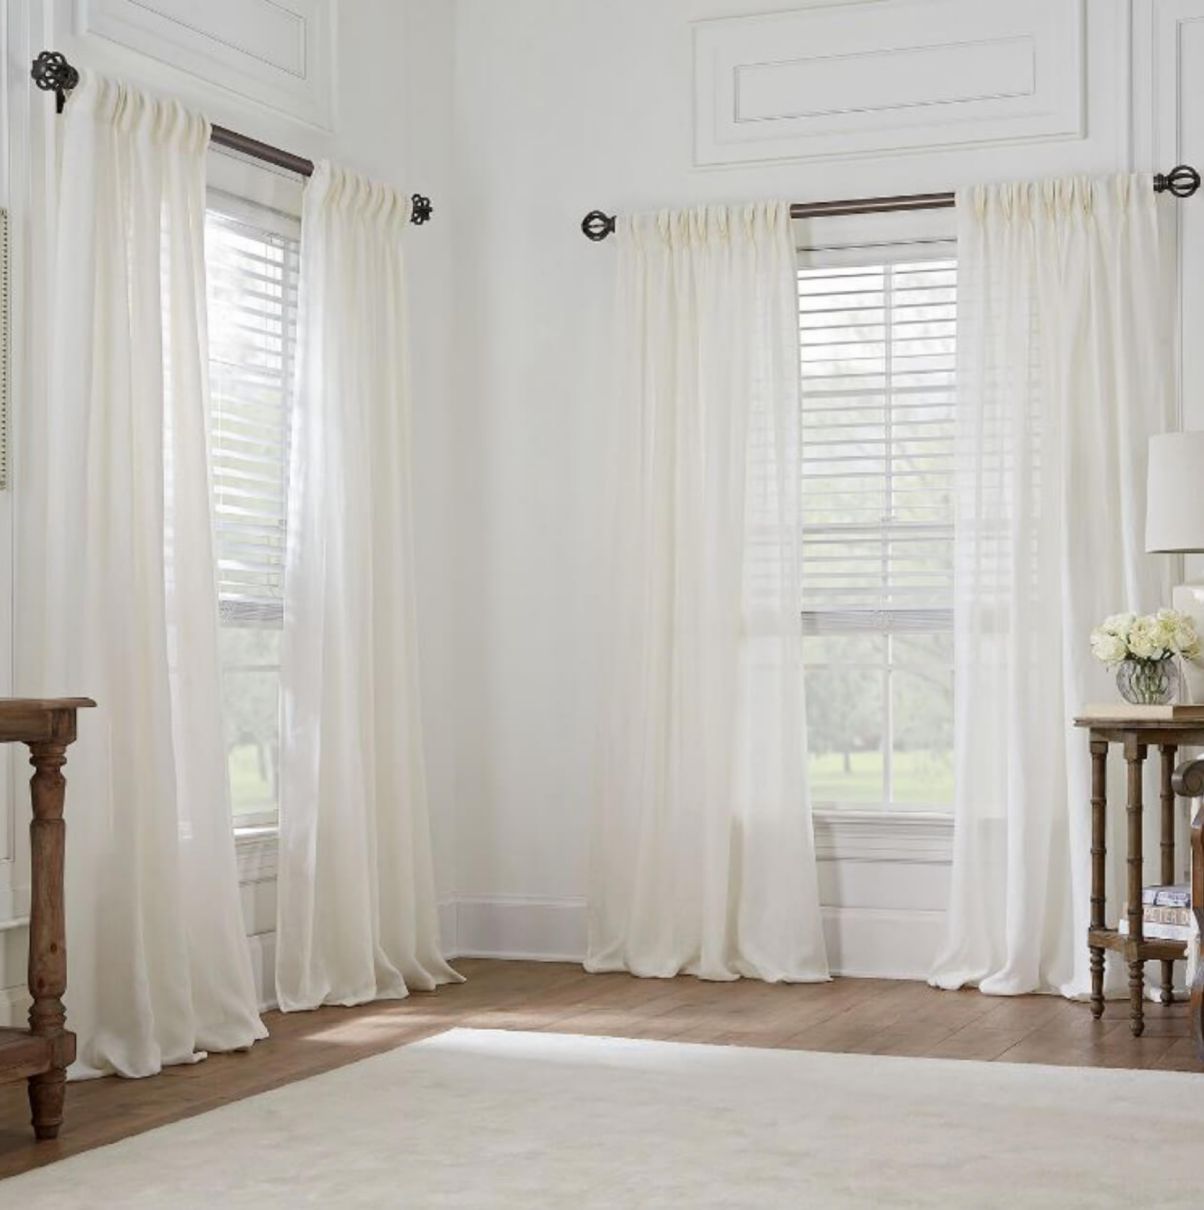 Window Treatment Buying Guide How To Buy Curtains Drapes Bed